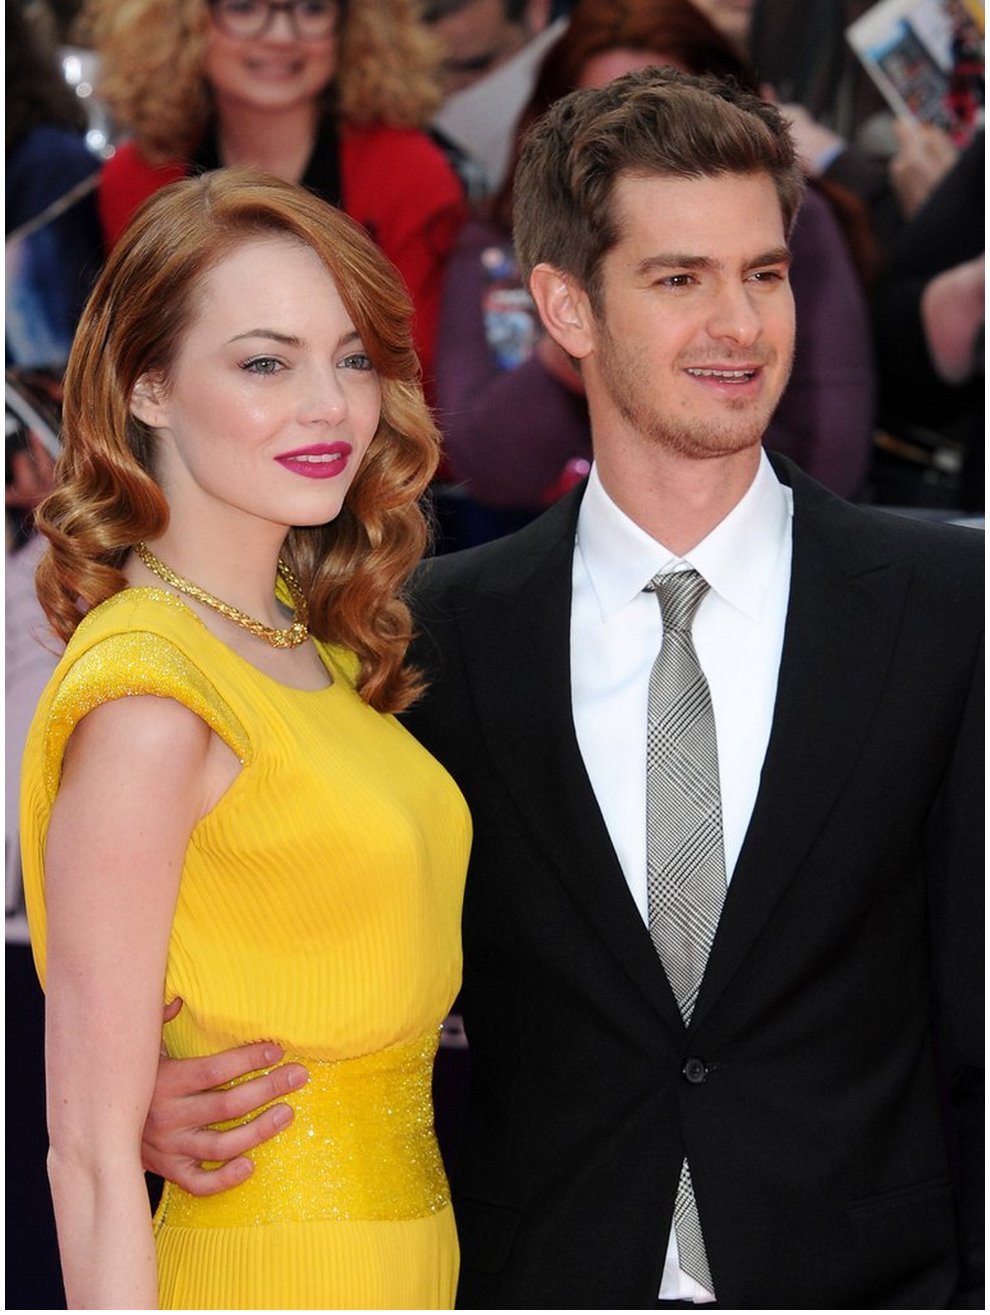 Hollyood actress Emma stone with Andrew-Garfield